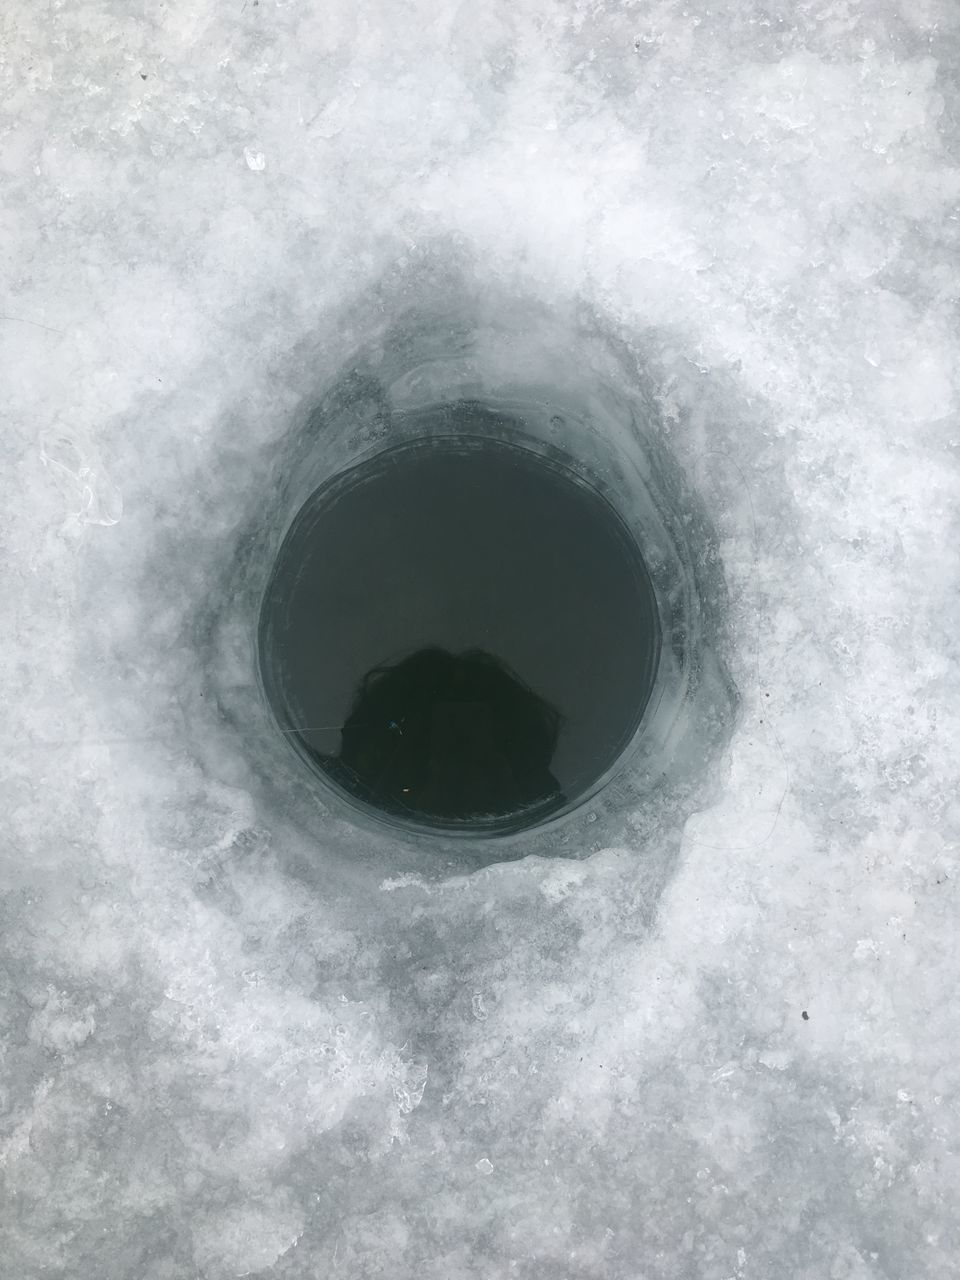 FULL FRAME SHOT OF SNOW COVERED WITH HOLE